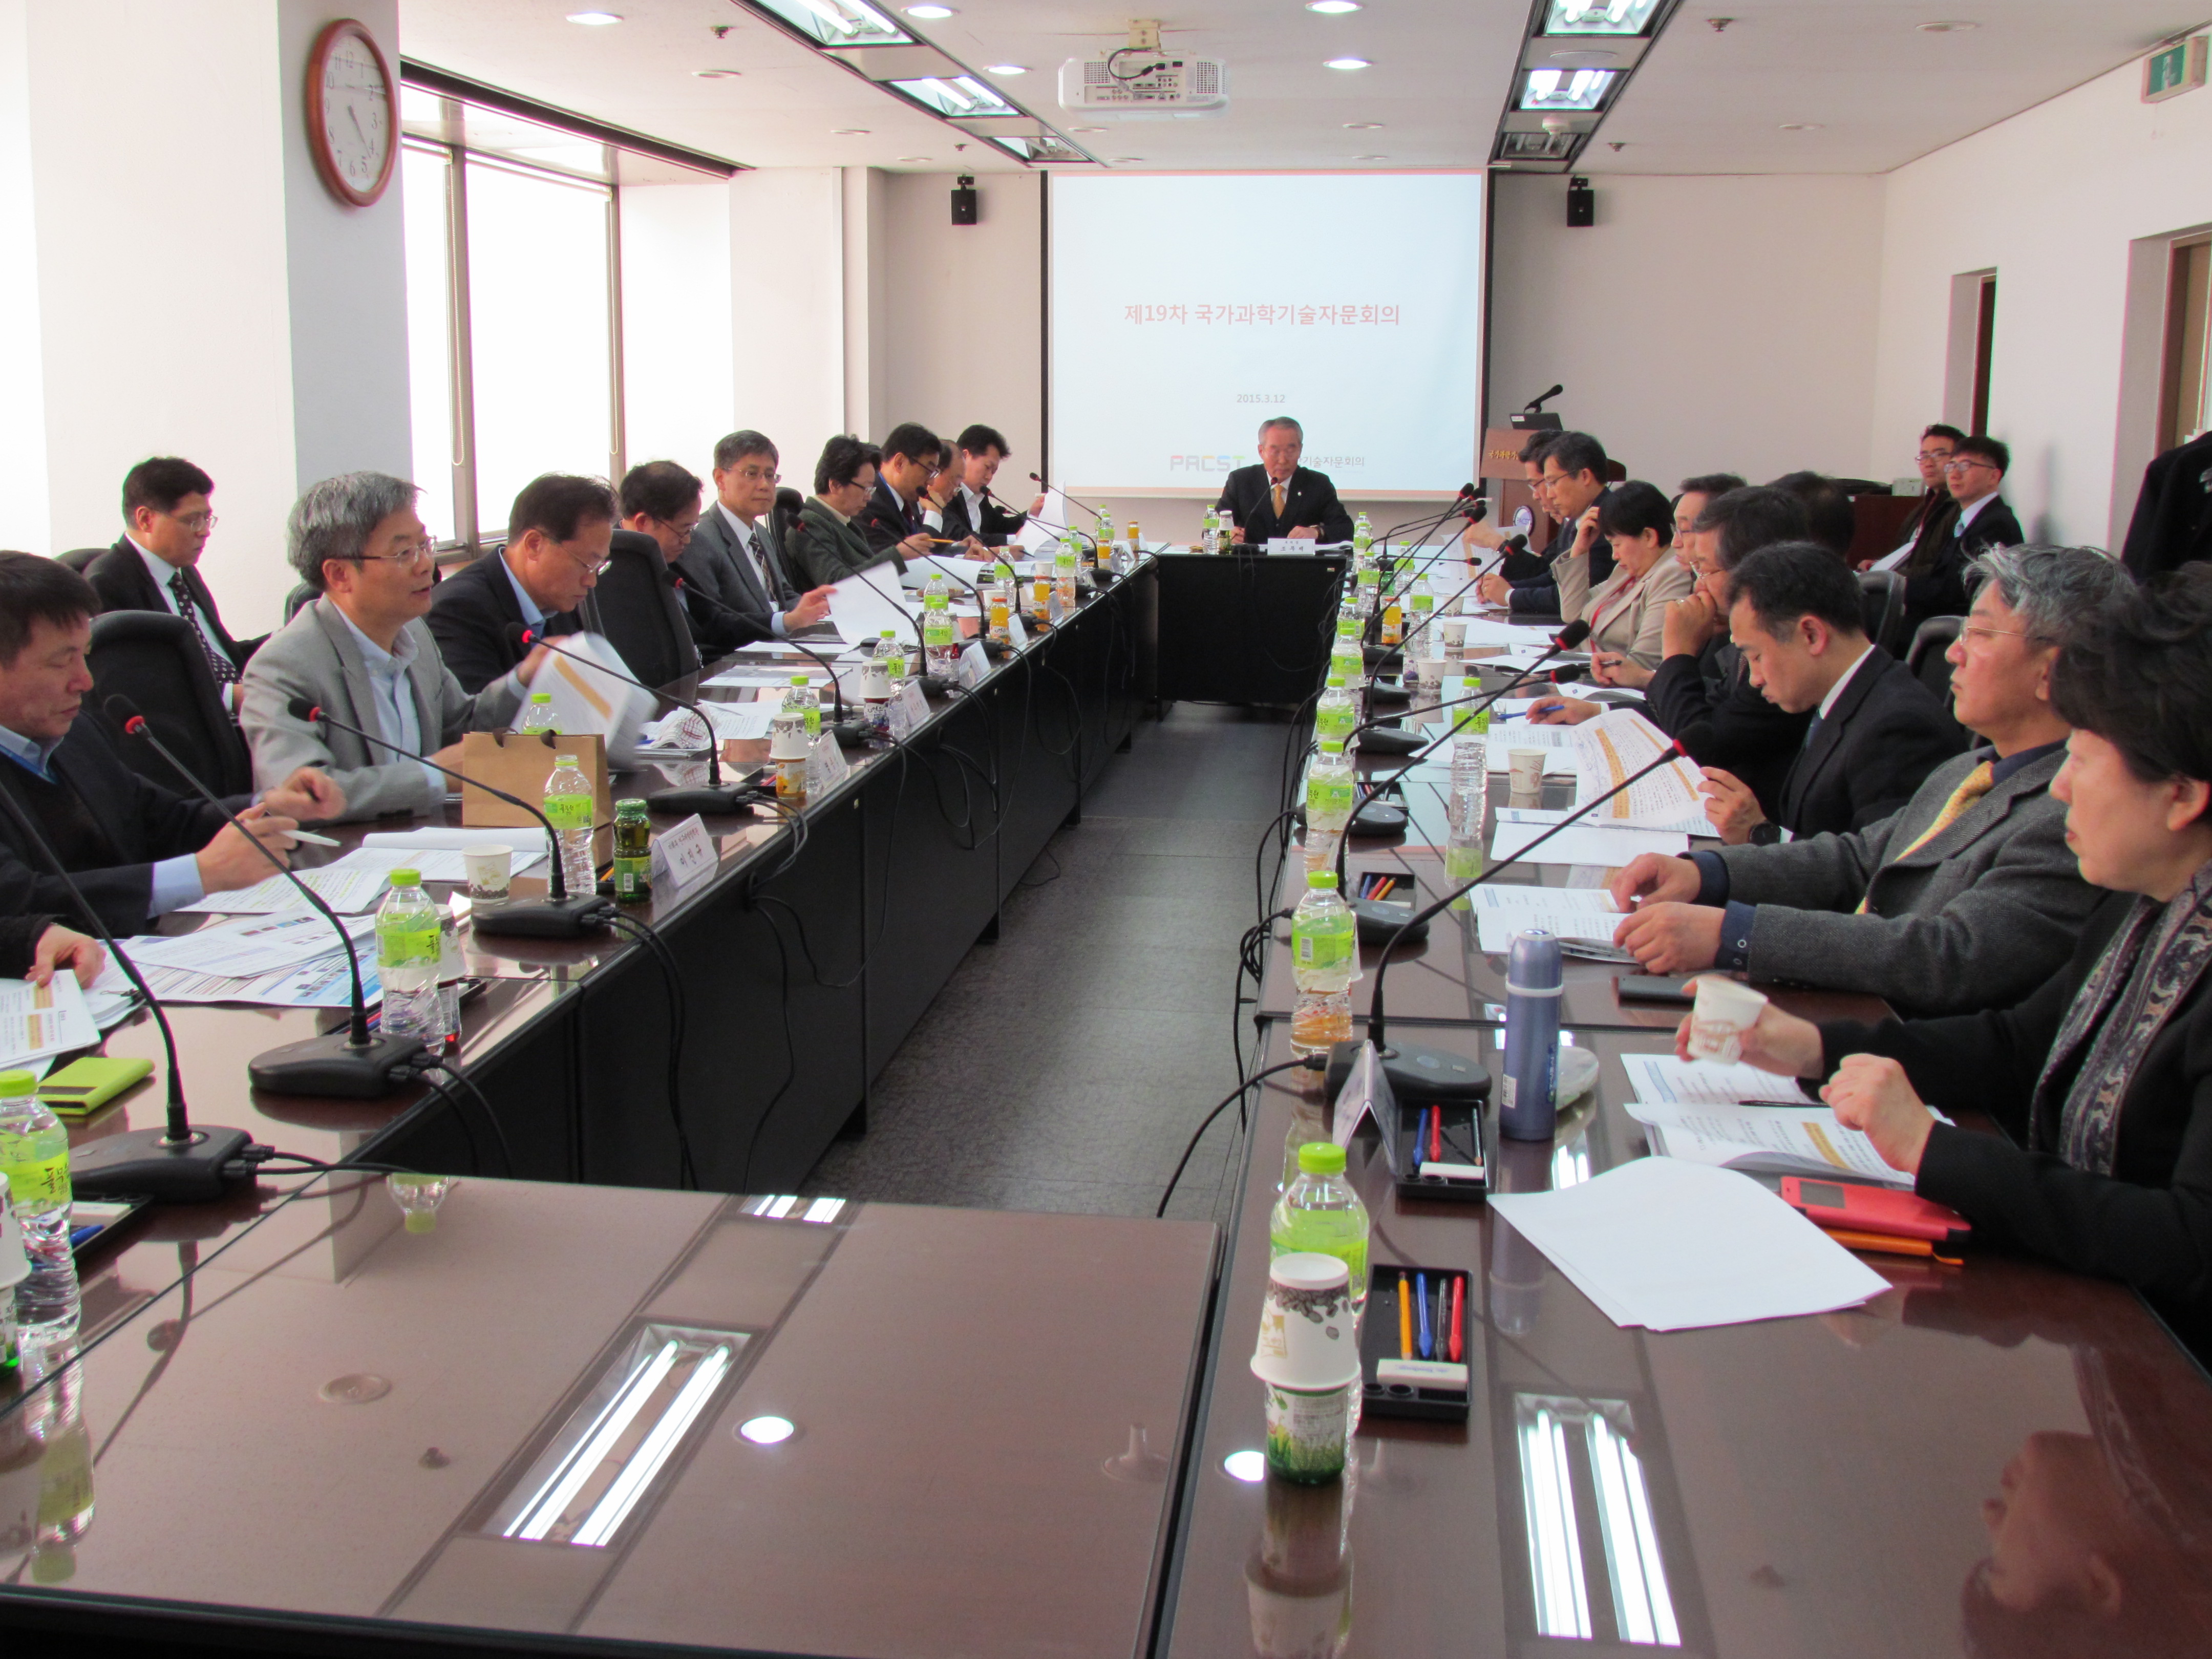 The 19th General Meeting was held on March 12, 2015 at the conference room in the PACST